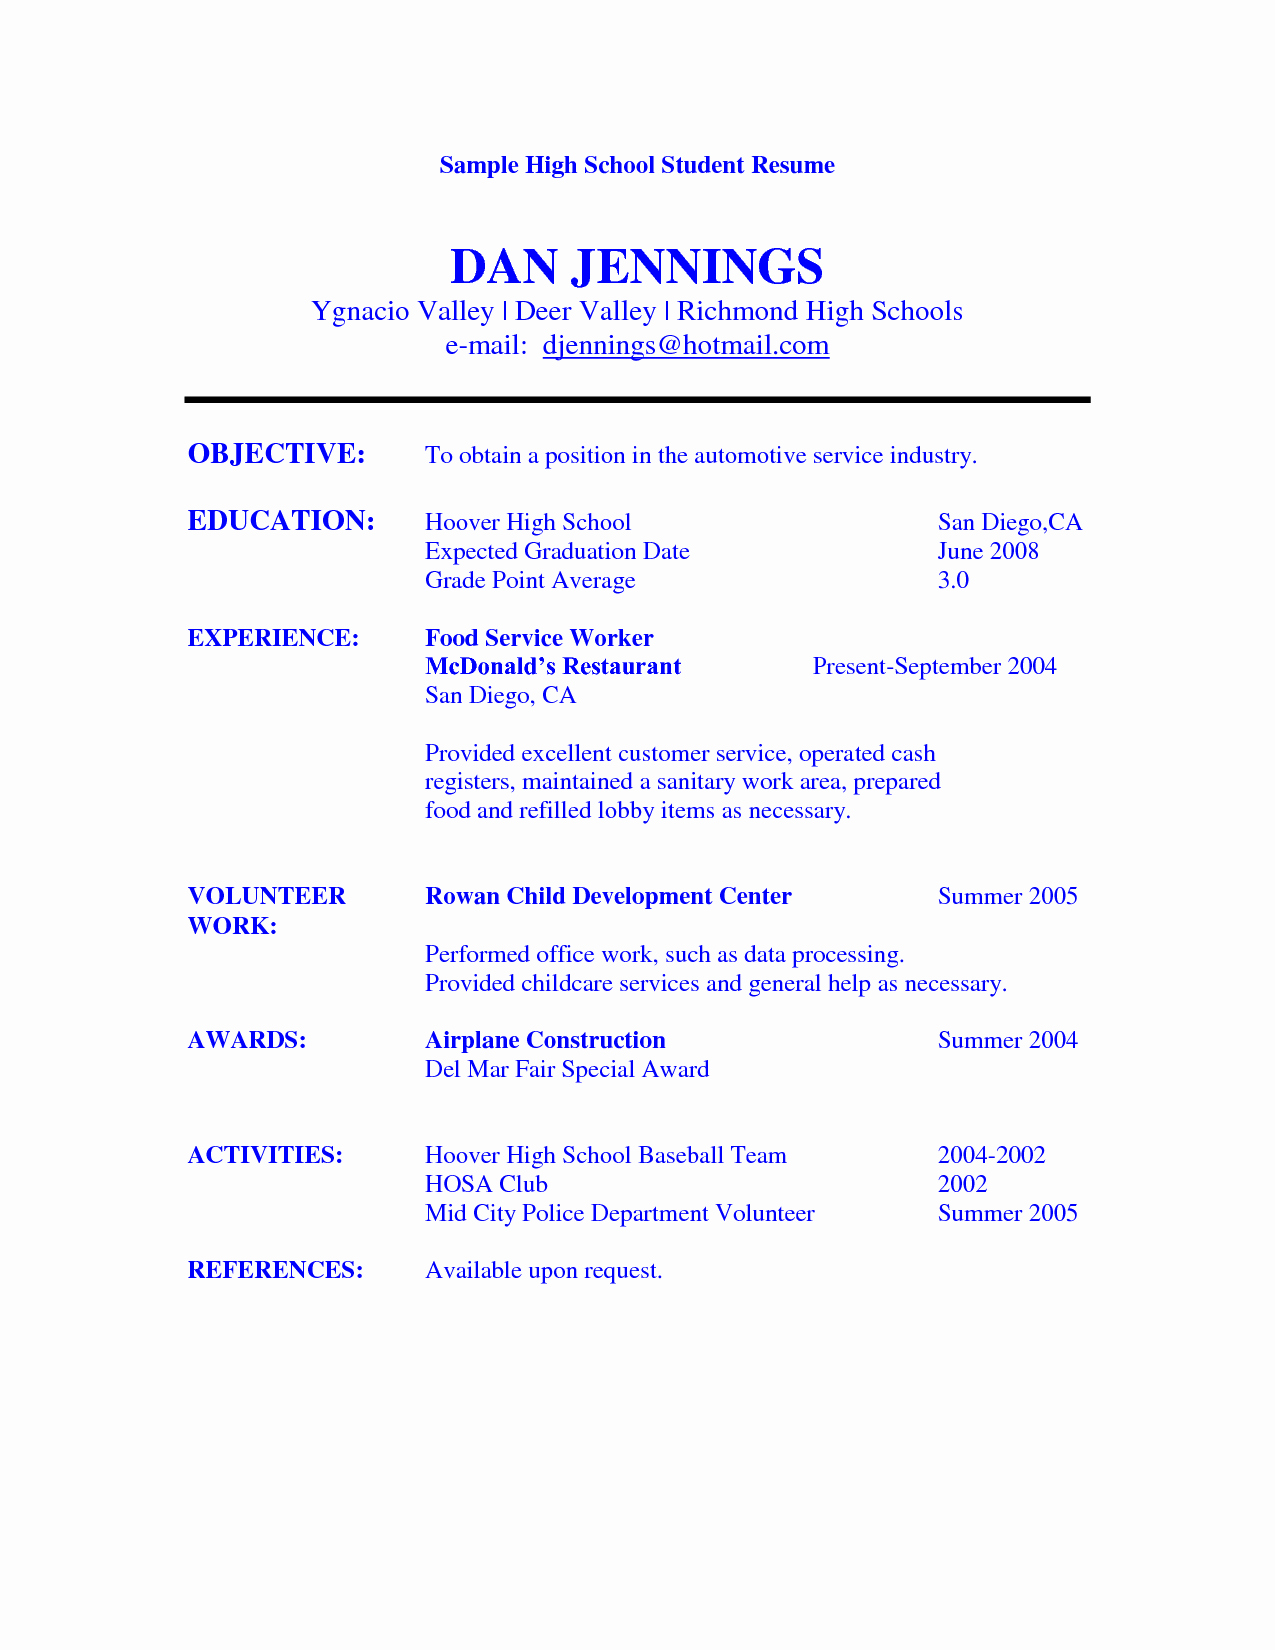 Resume Example for High School Student Sample Resumes